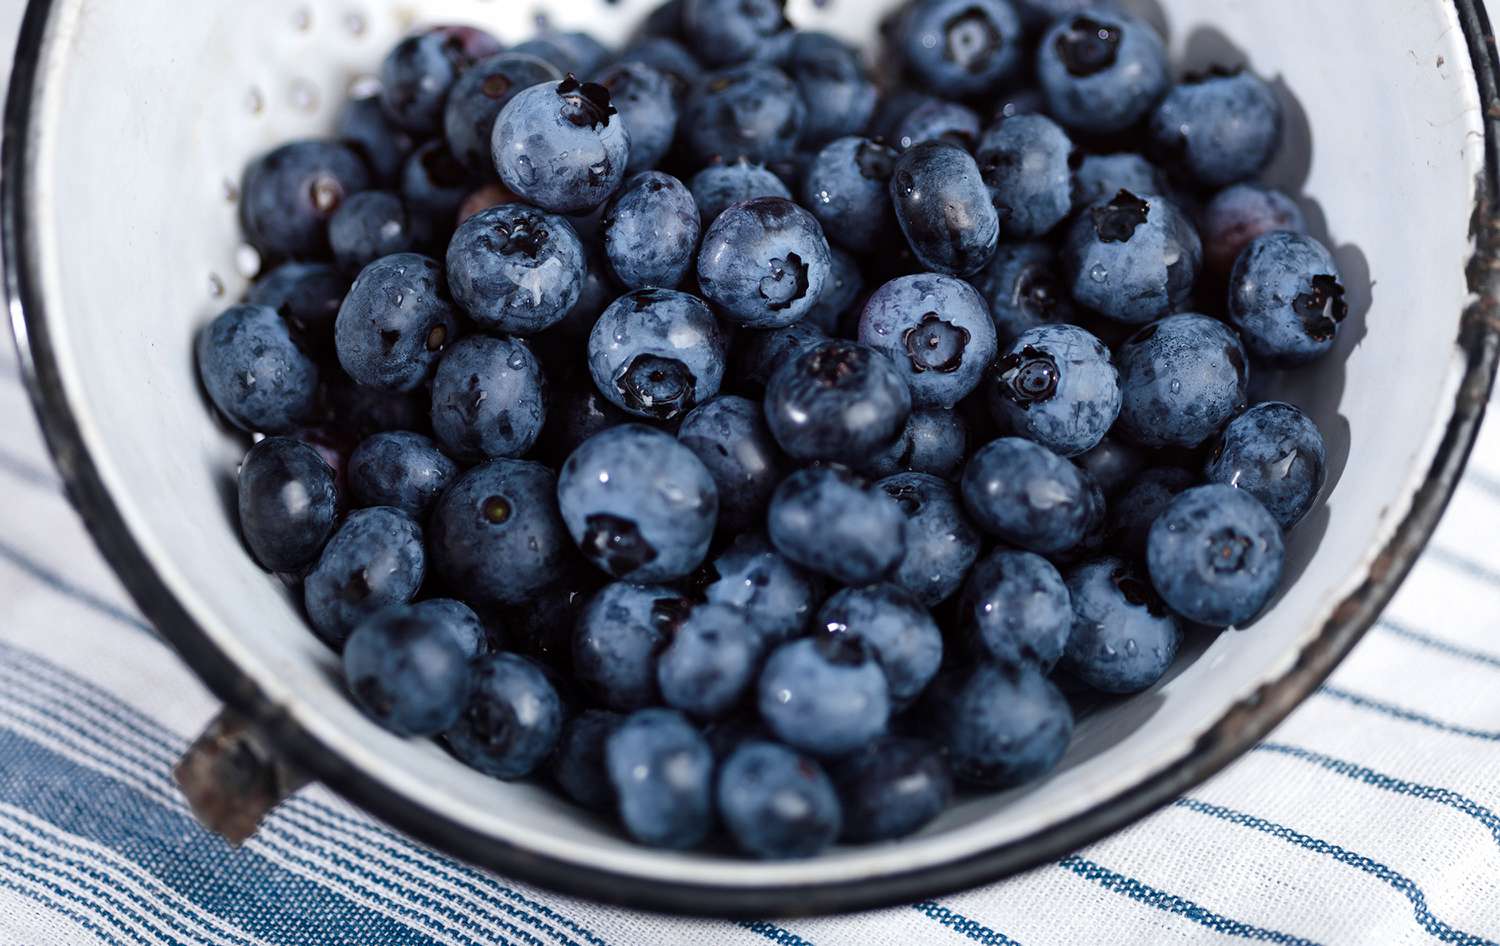 How to Wash Blueberries the Right Way [Video]